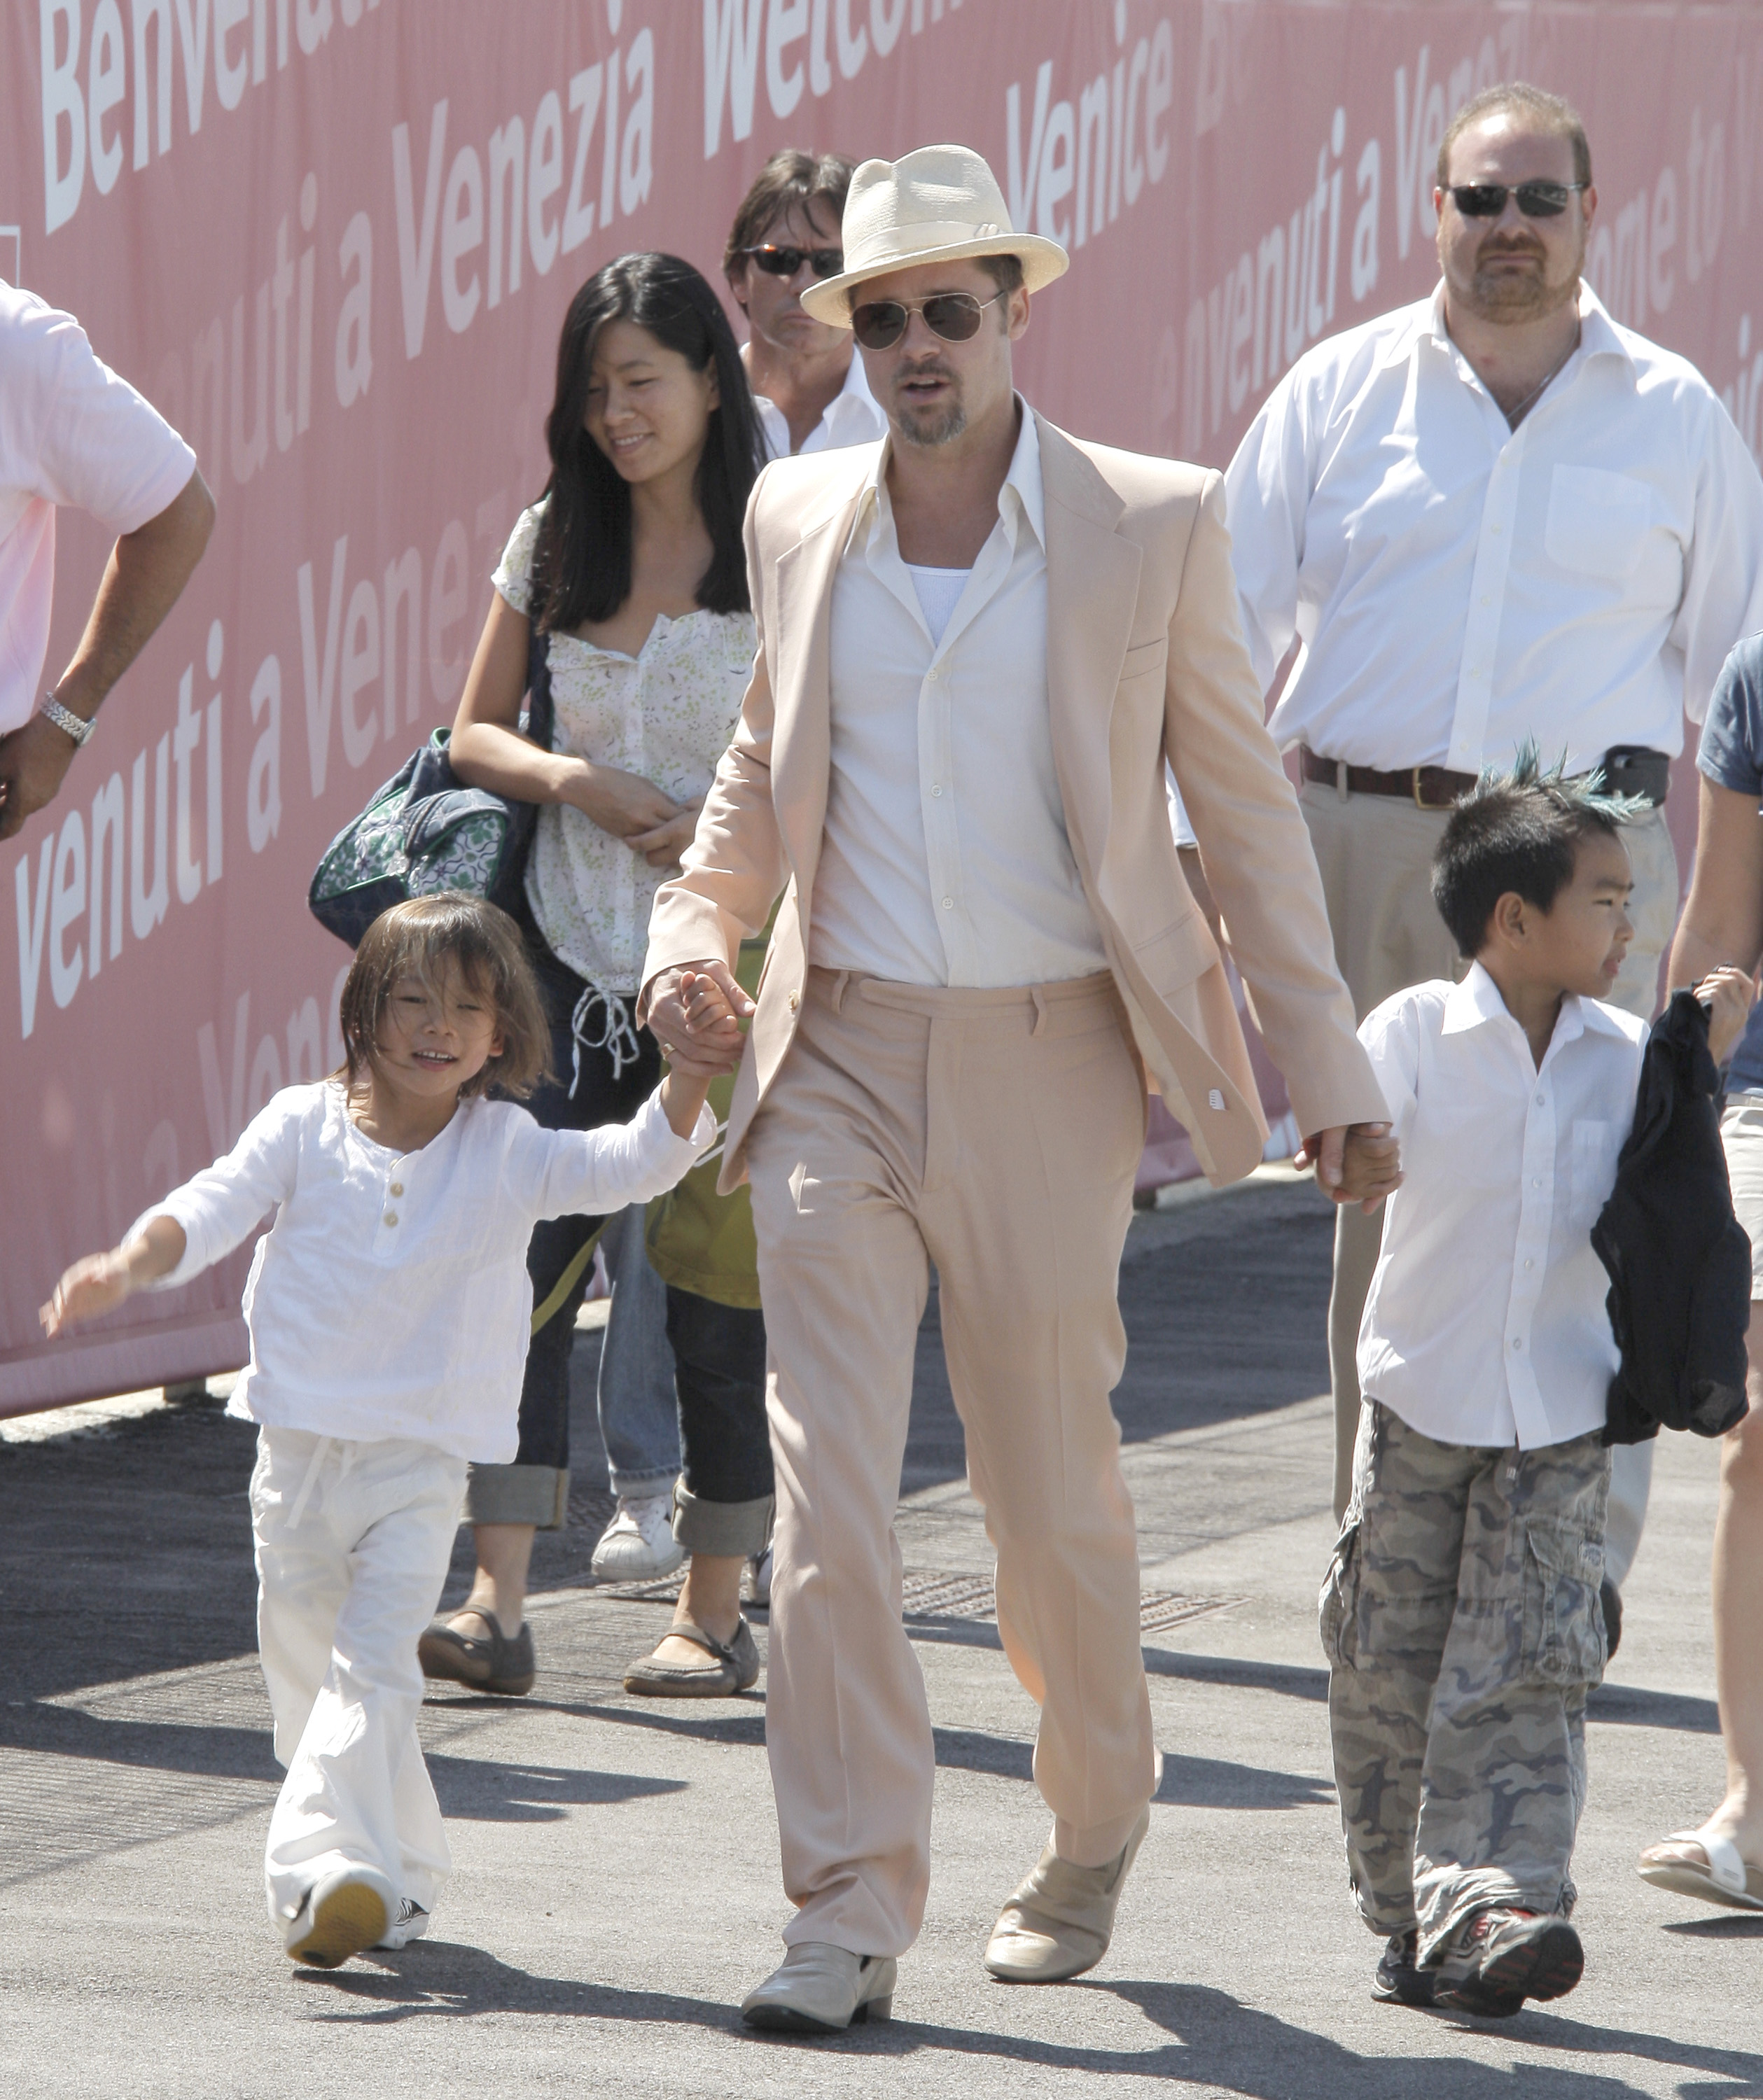 Brad Pitt with his sons Pax Thien Jolie-Pitt and Maddox Jolie-Pitt on August 28, 2008 in Venice Italy. | Source: Getty Images